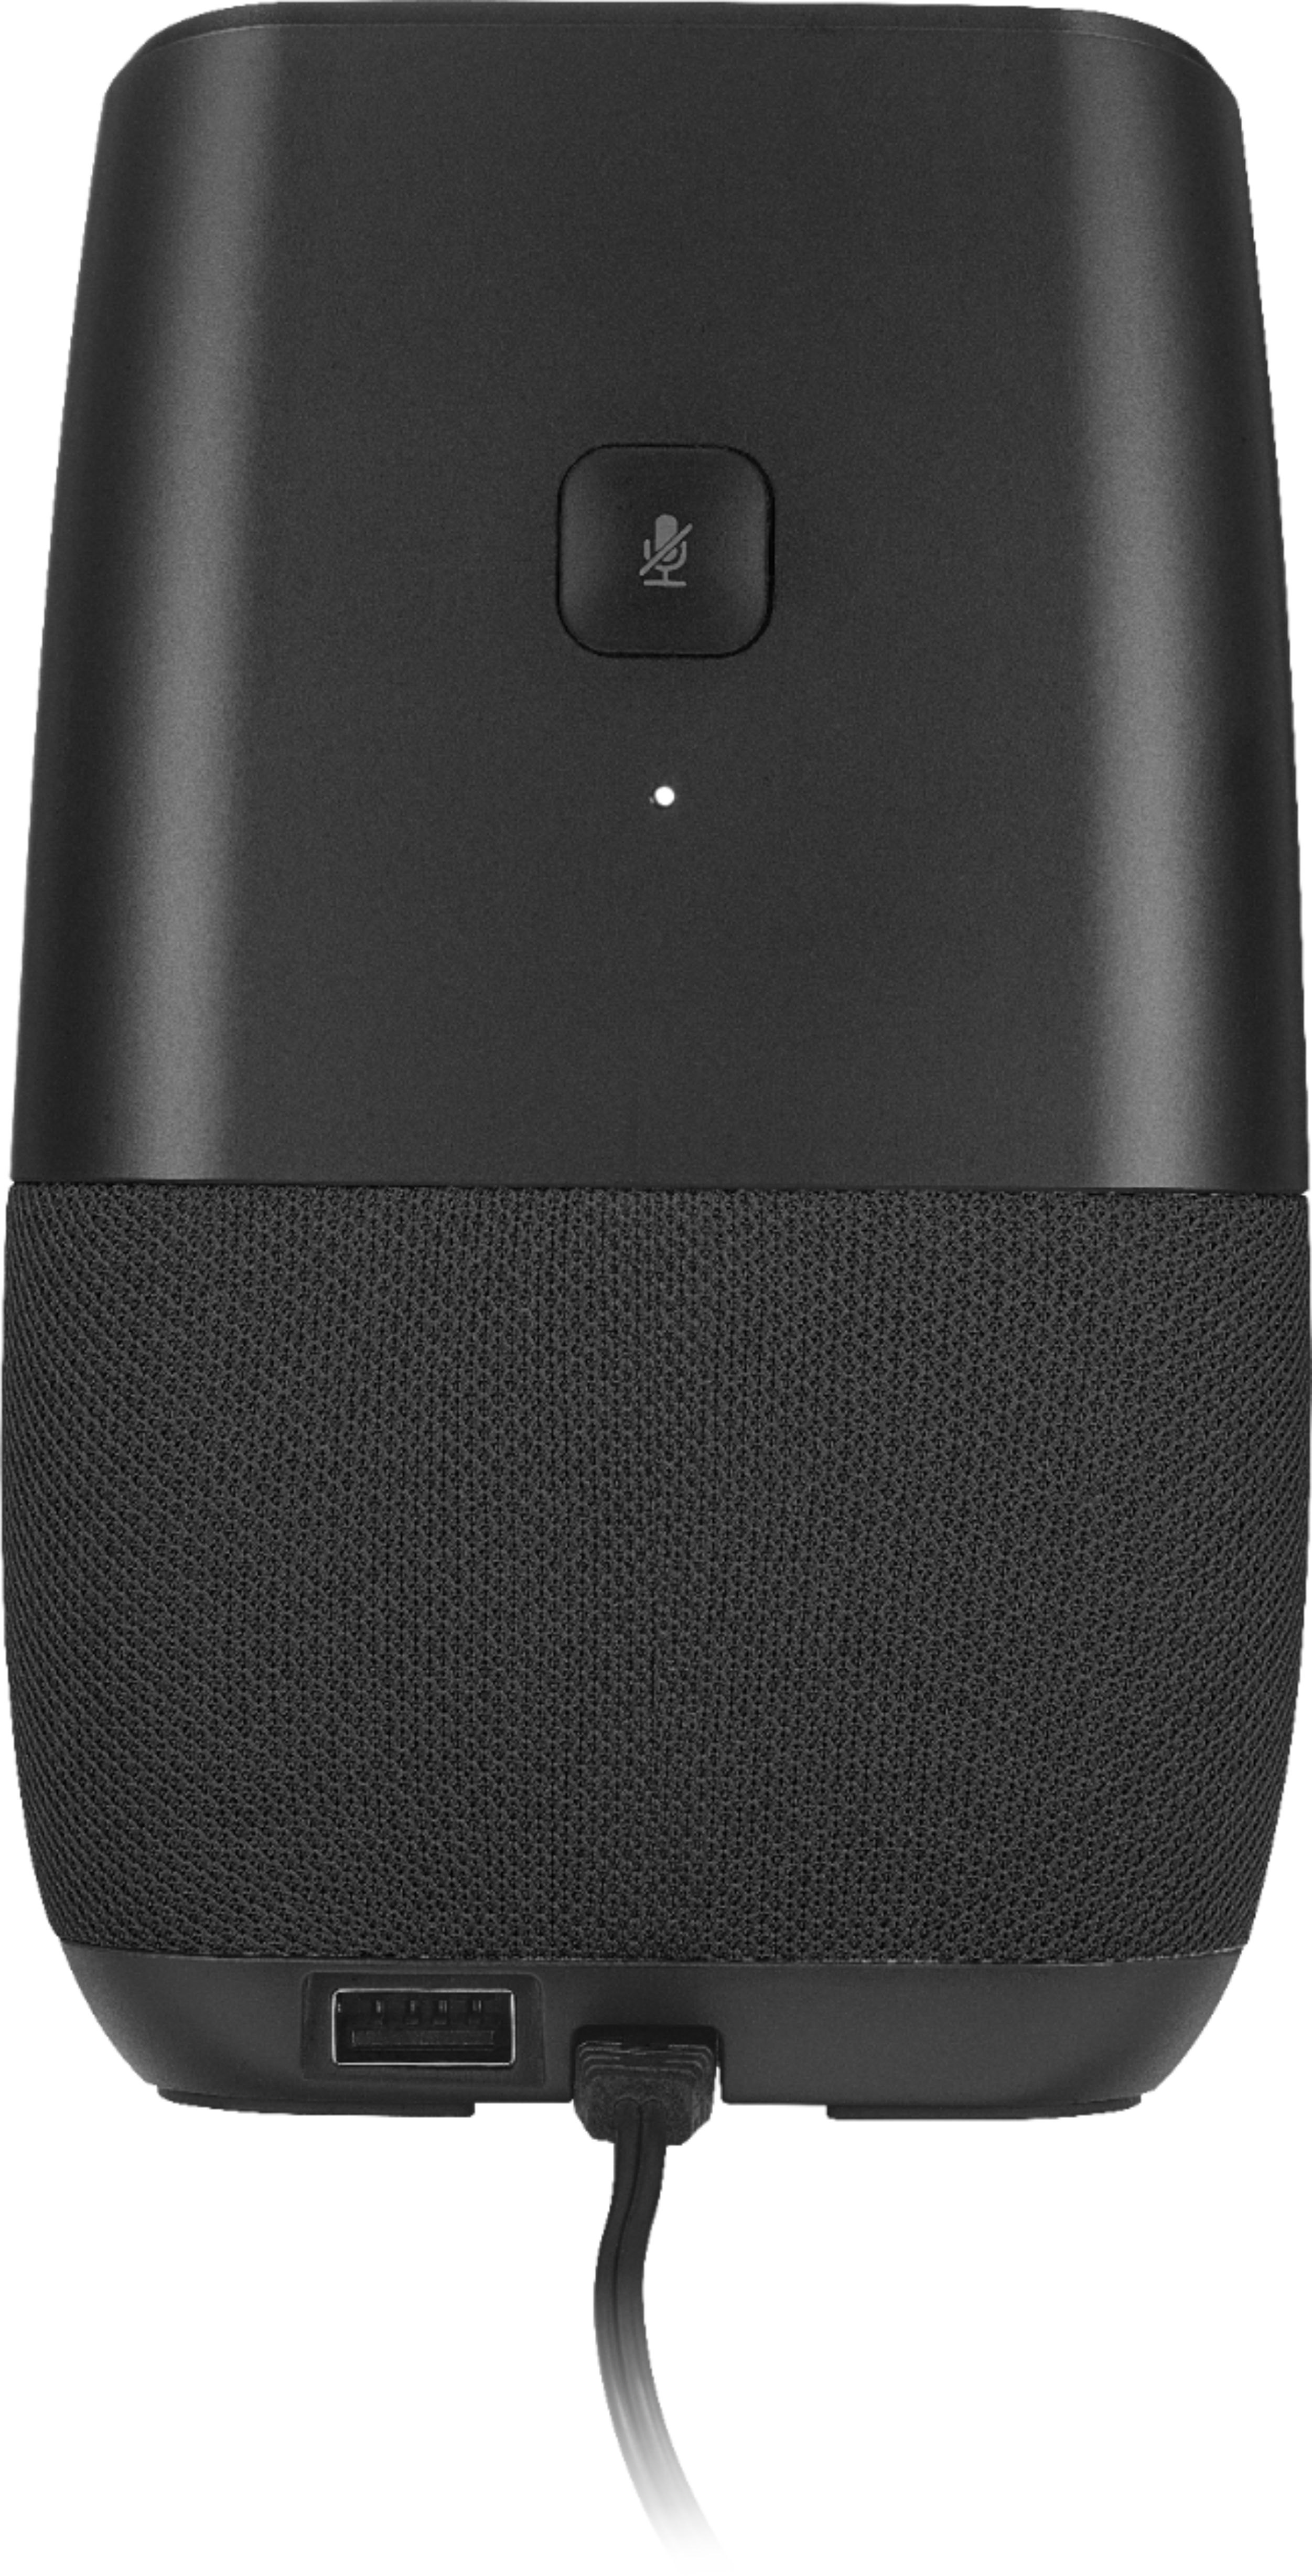 insignia bluetooth speaker with google assistant